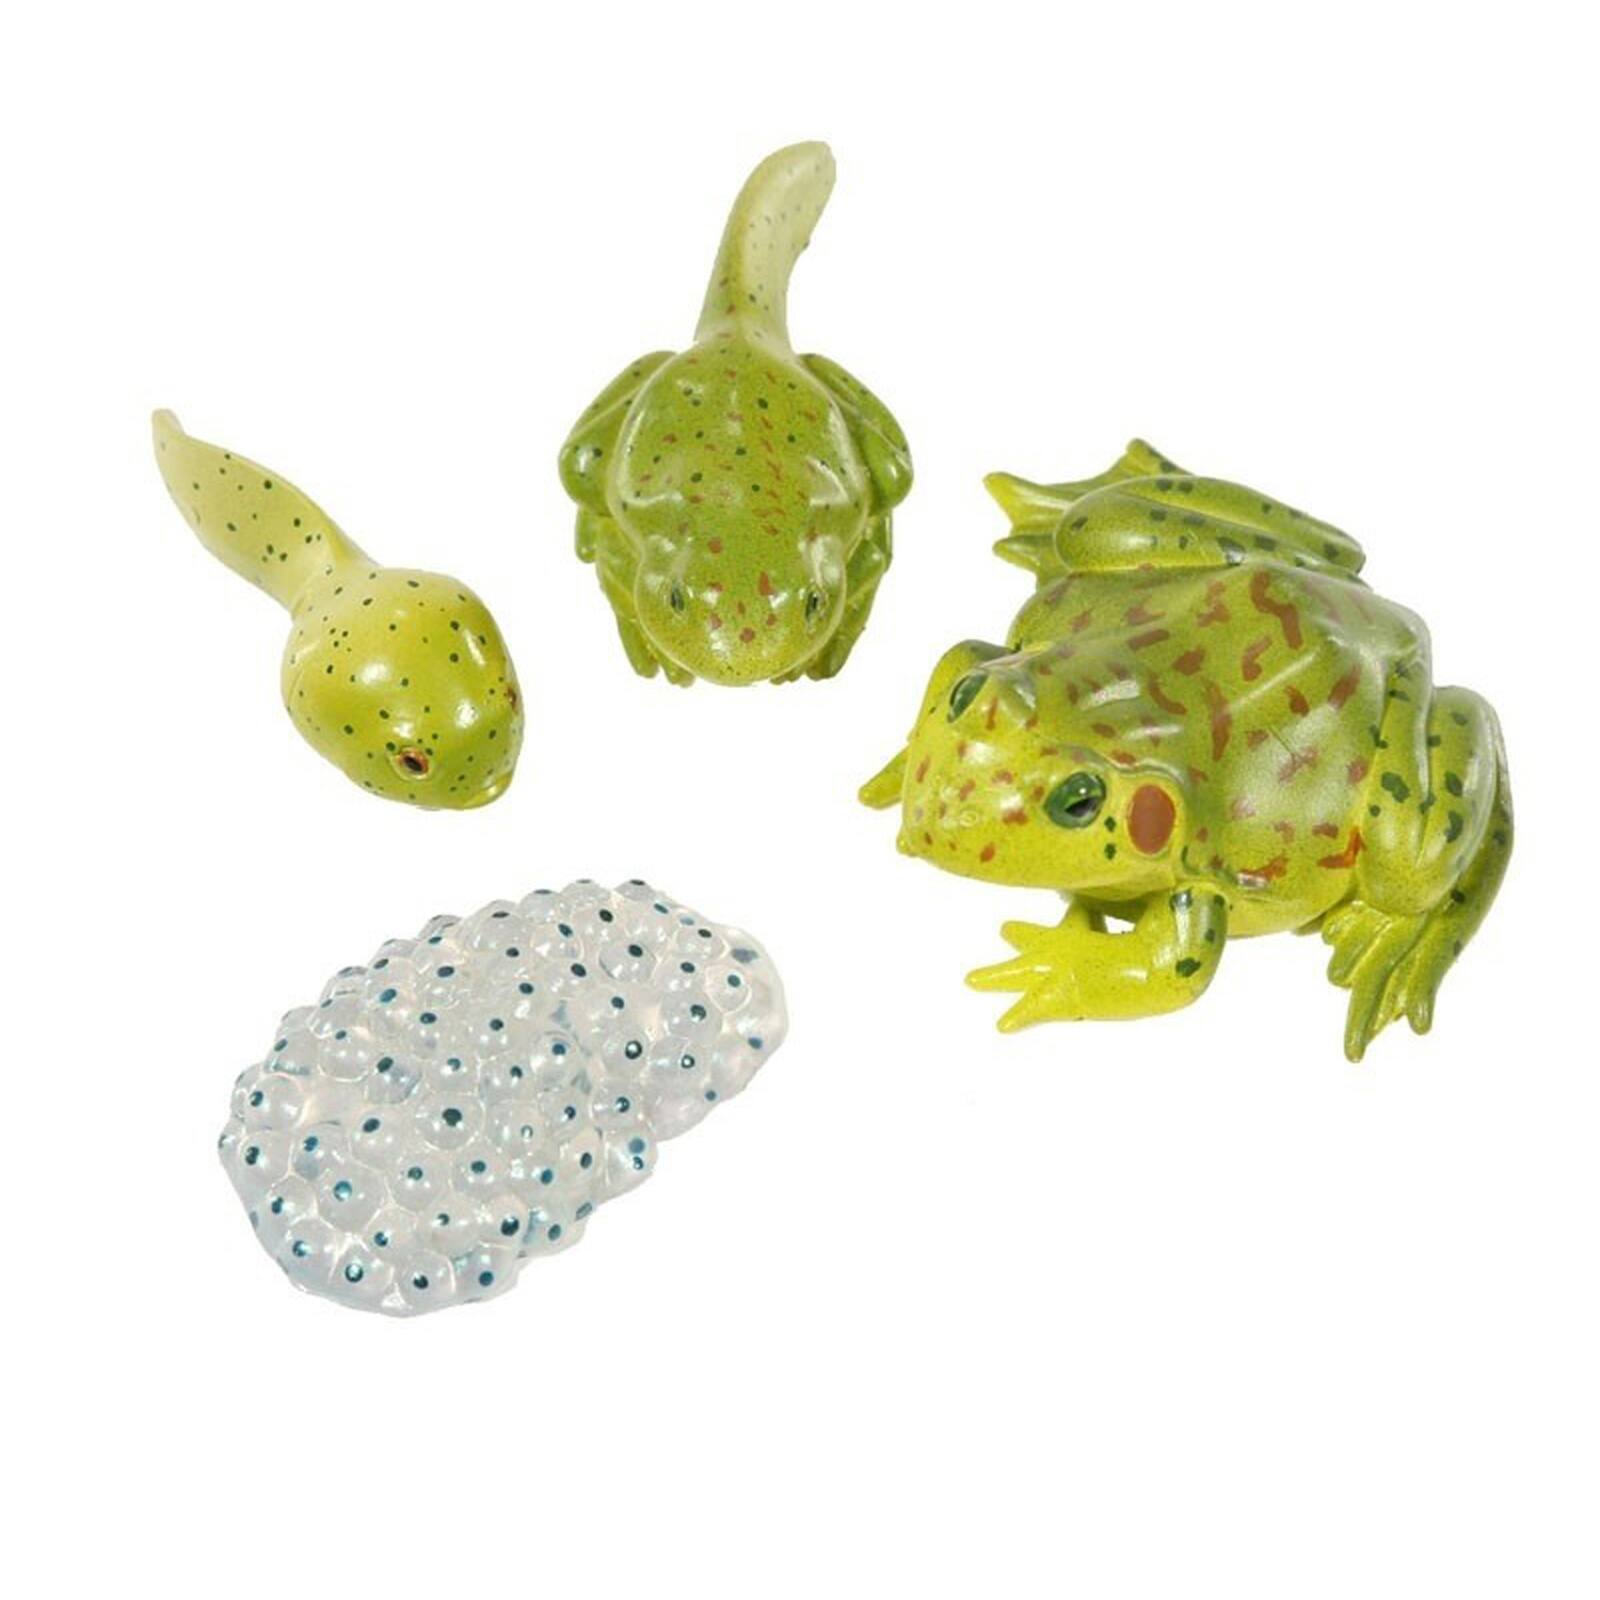 UANDME 5PCS Frog Life Cycle Figures Realistic Frog Life Stages Model Toy Figures for Children Learning and Teaching Aids 